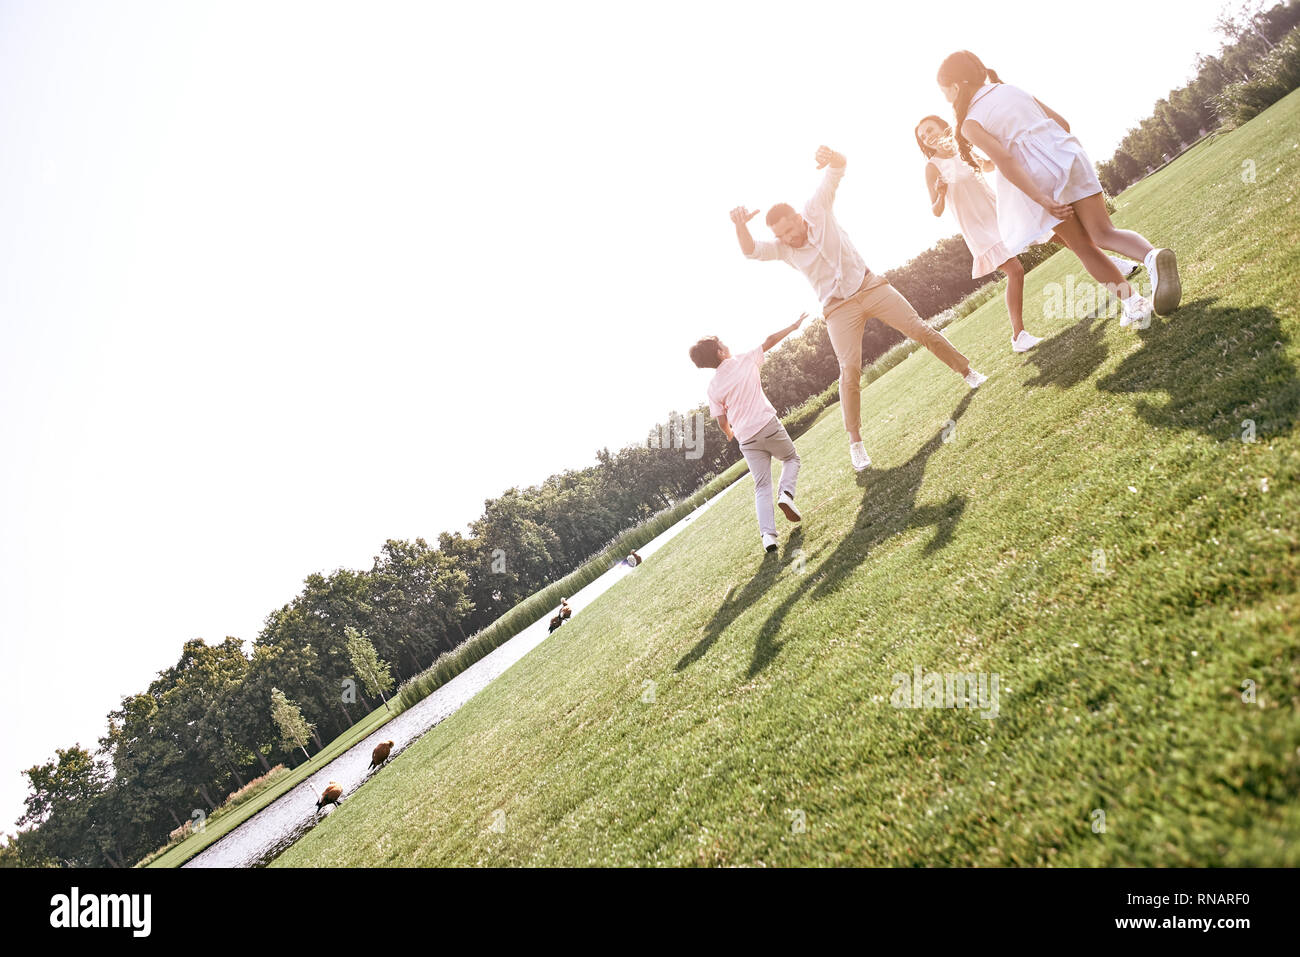 Bonding. Family of four running on grassy field playing playing touch and run game laughing cheerful Stock Photo